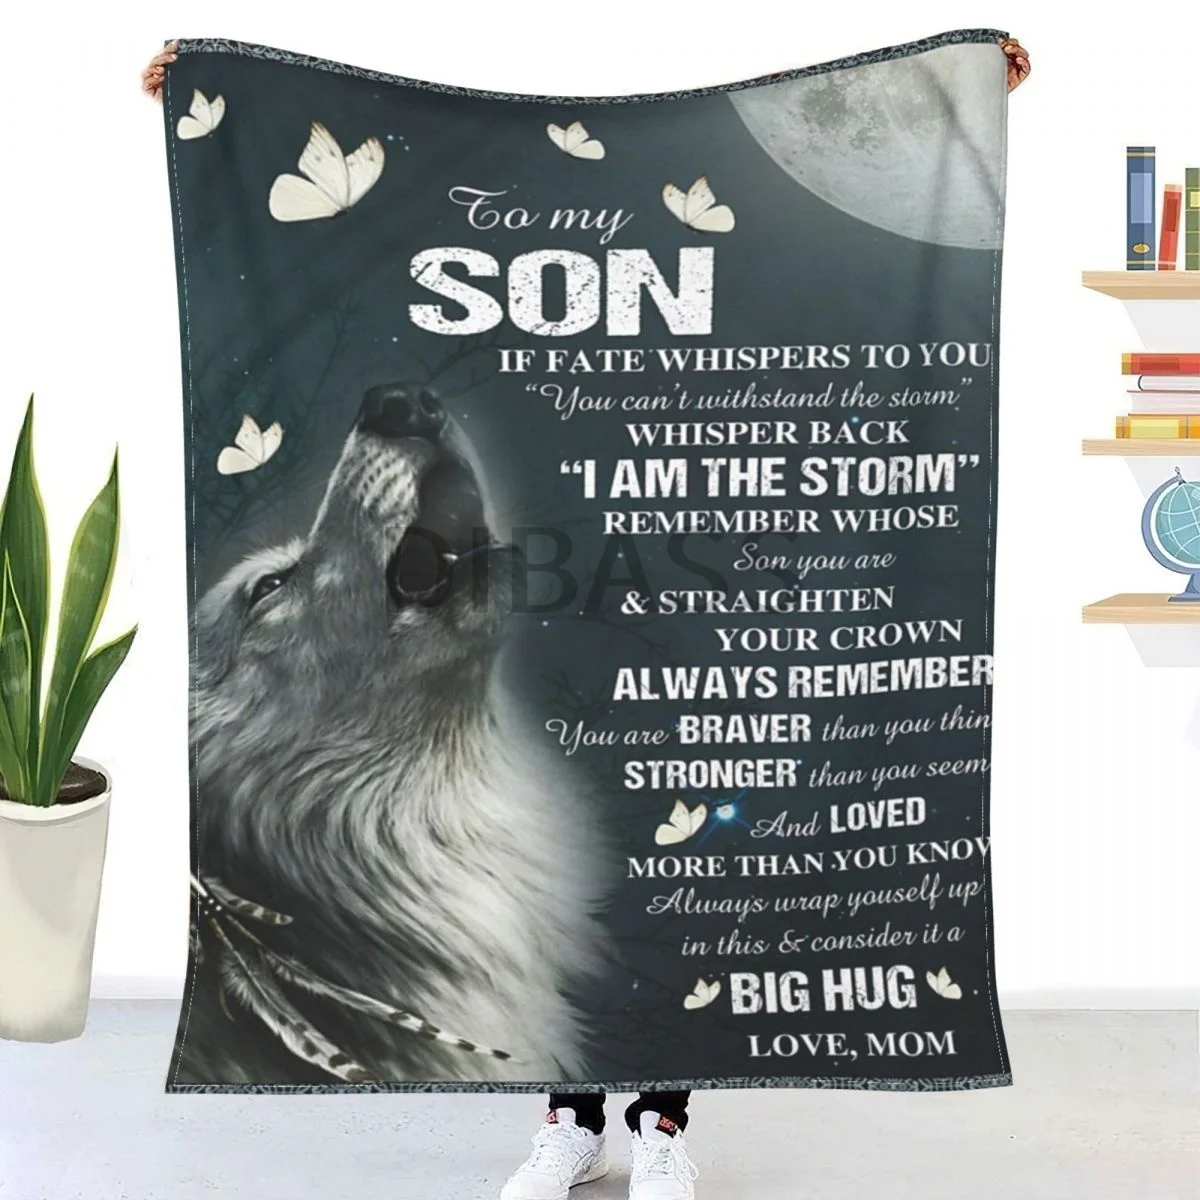 

I AM THE STORM ; AMAZING GIFT FOR SON Sherpa 3D Printed Flannel Throw Blanket for Super Soft Blankets, Bedroom Sofa deco